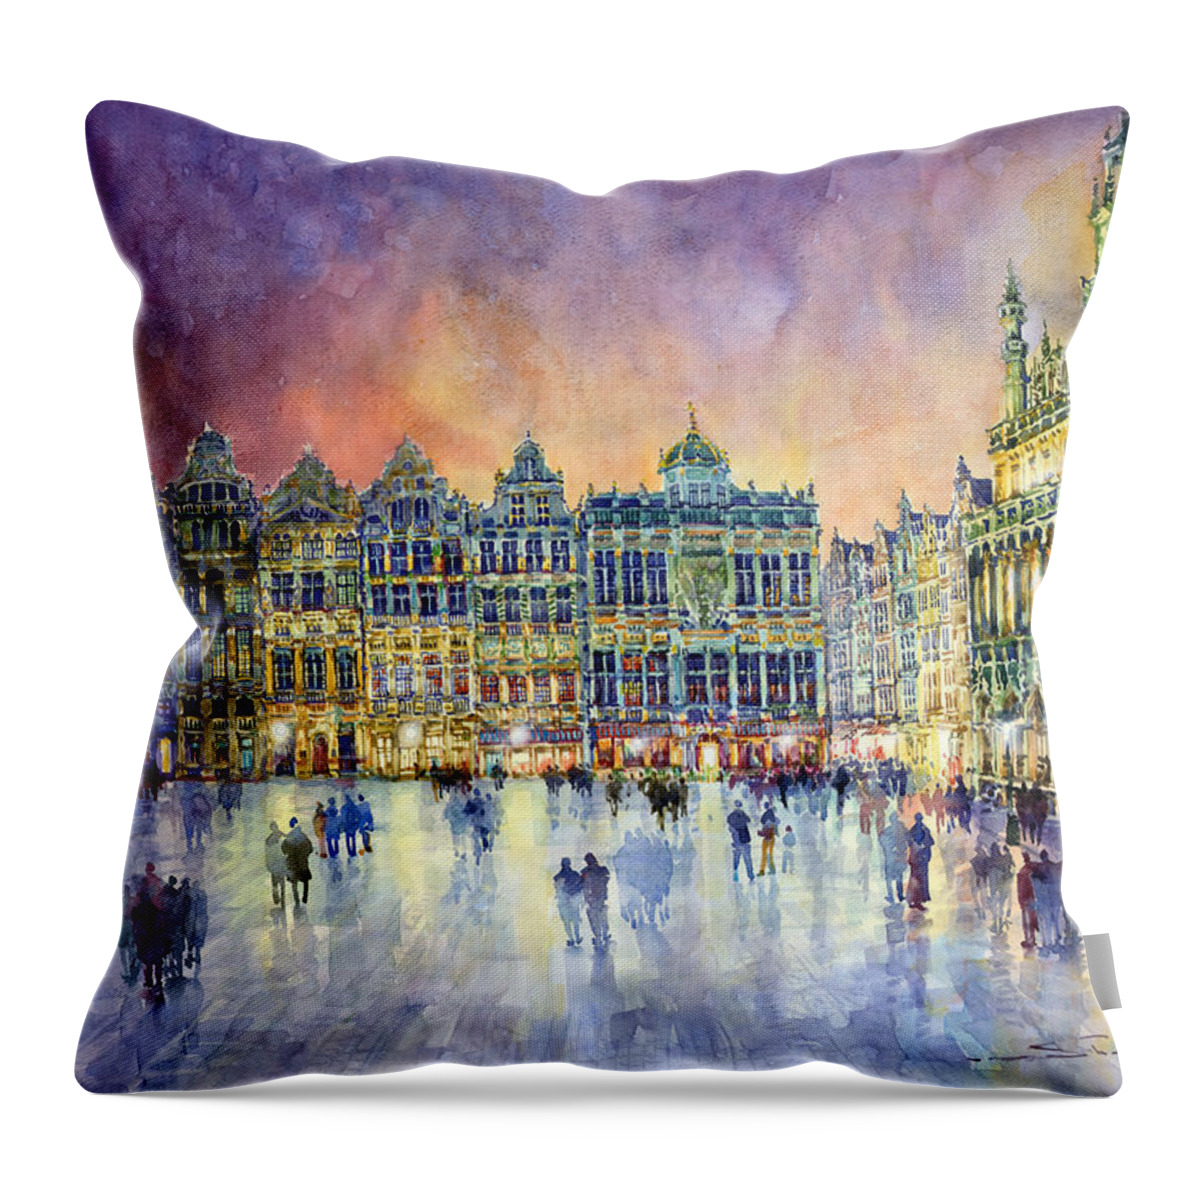 Watercolor Throw Pillow featuring the painting Belgium Brussel Grand Place Grote Markt #2 by Yuriy Shevchuk